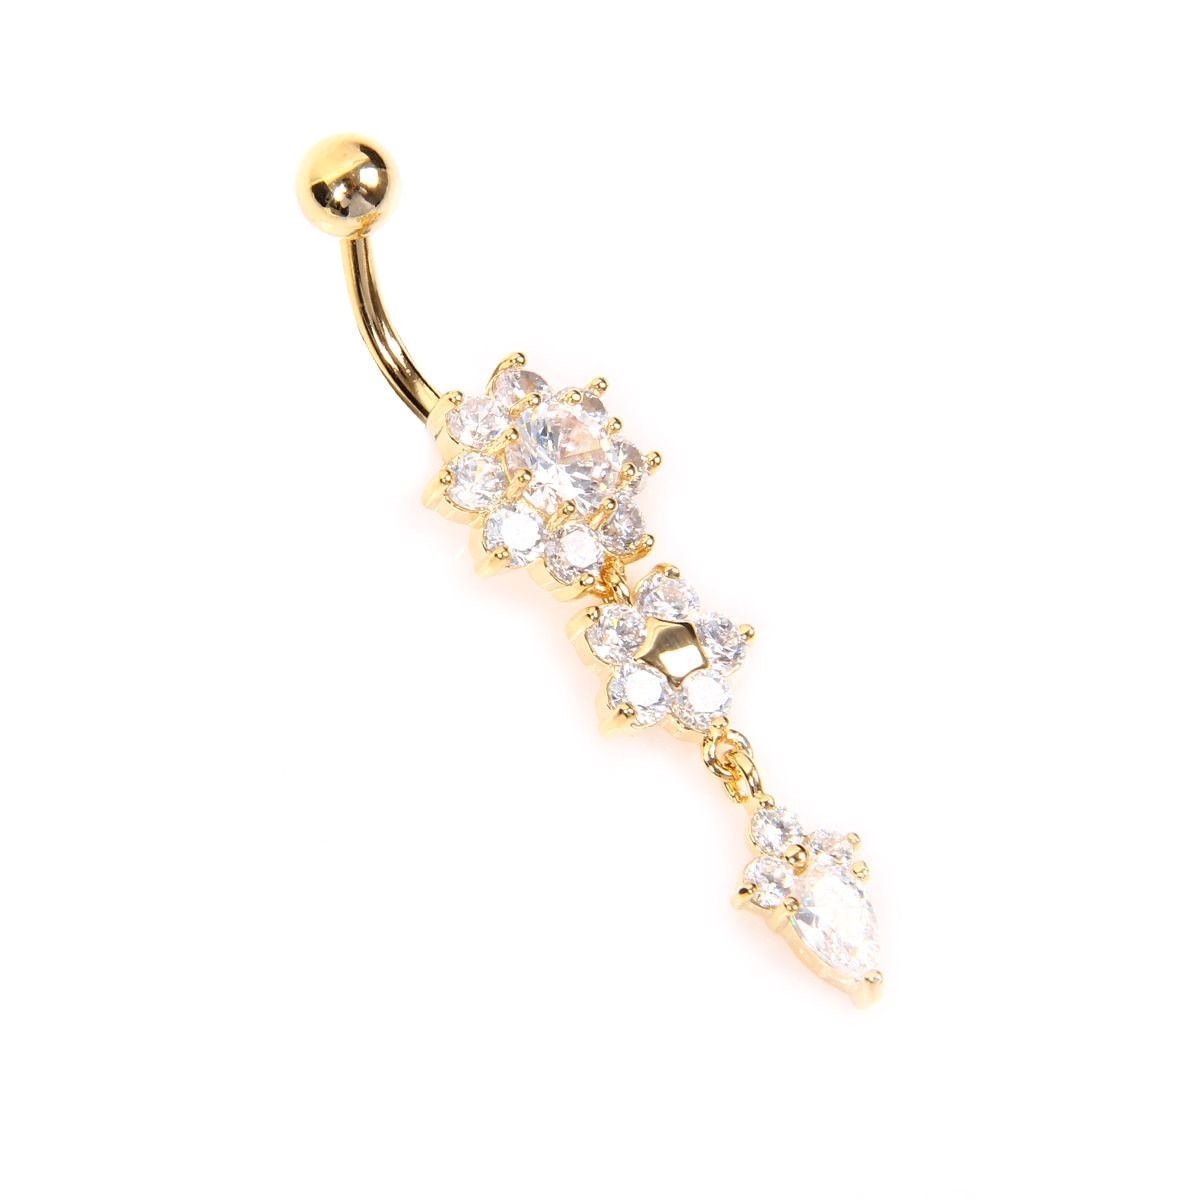 Beauty Crystal Flower Dangle Navel Belly Button Ring Bar Body Piercing Jewelry N4 Free Image